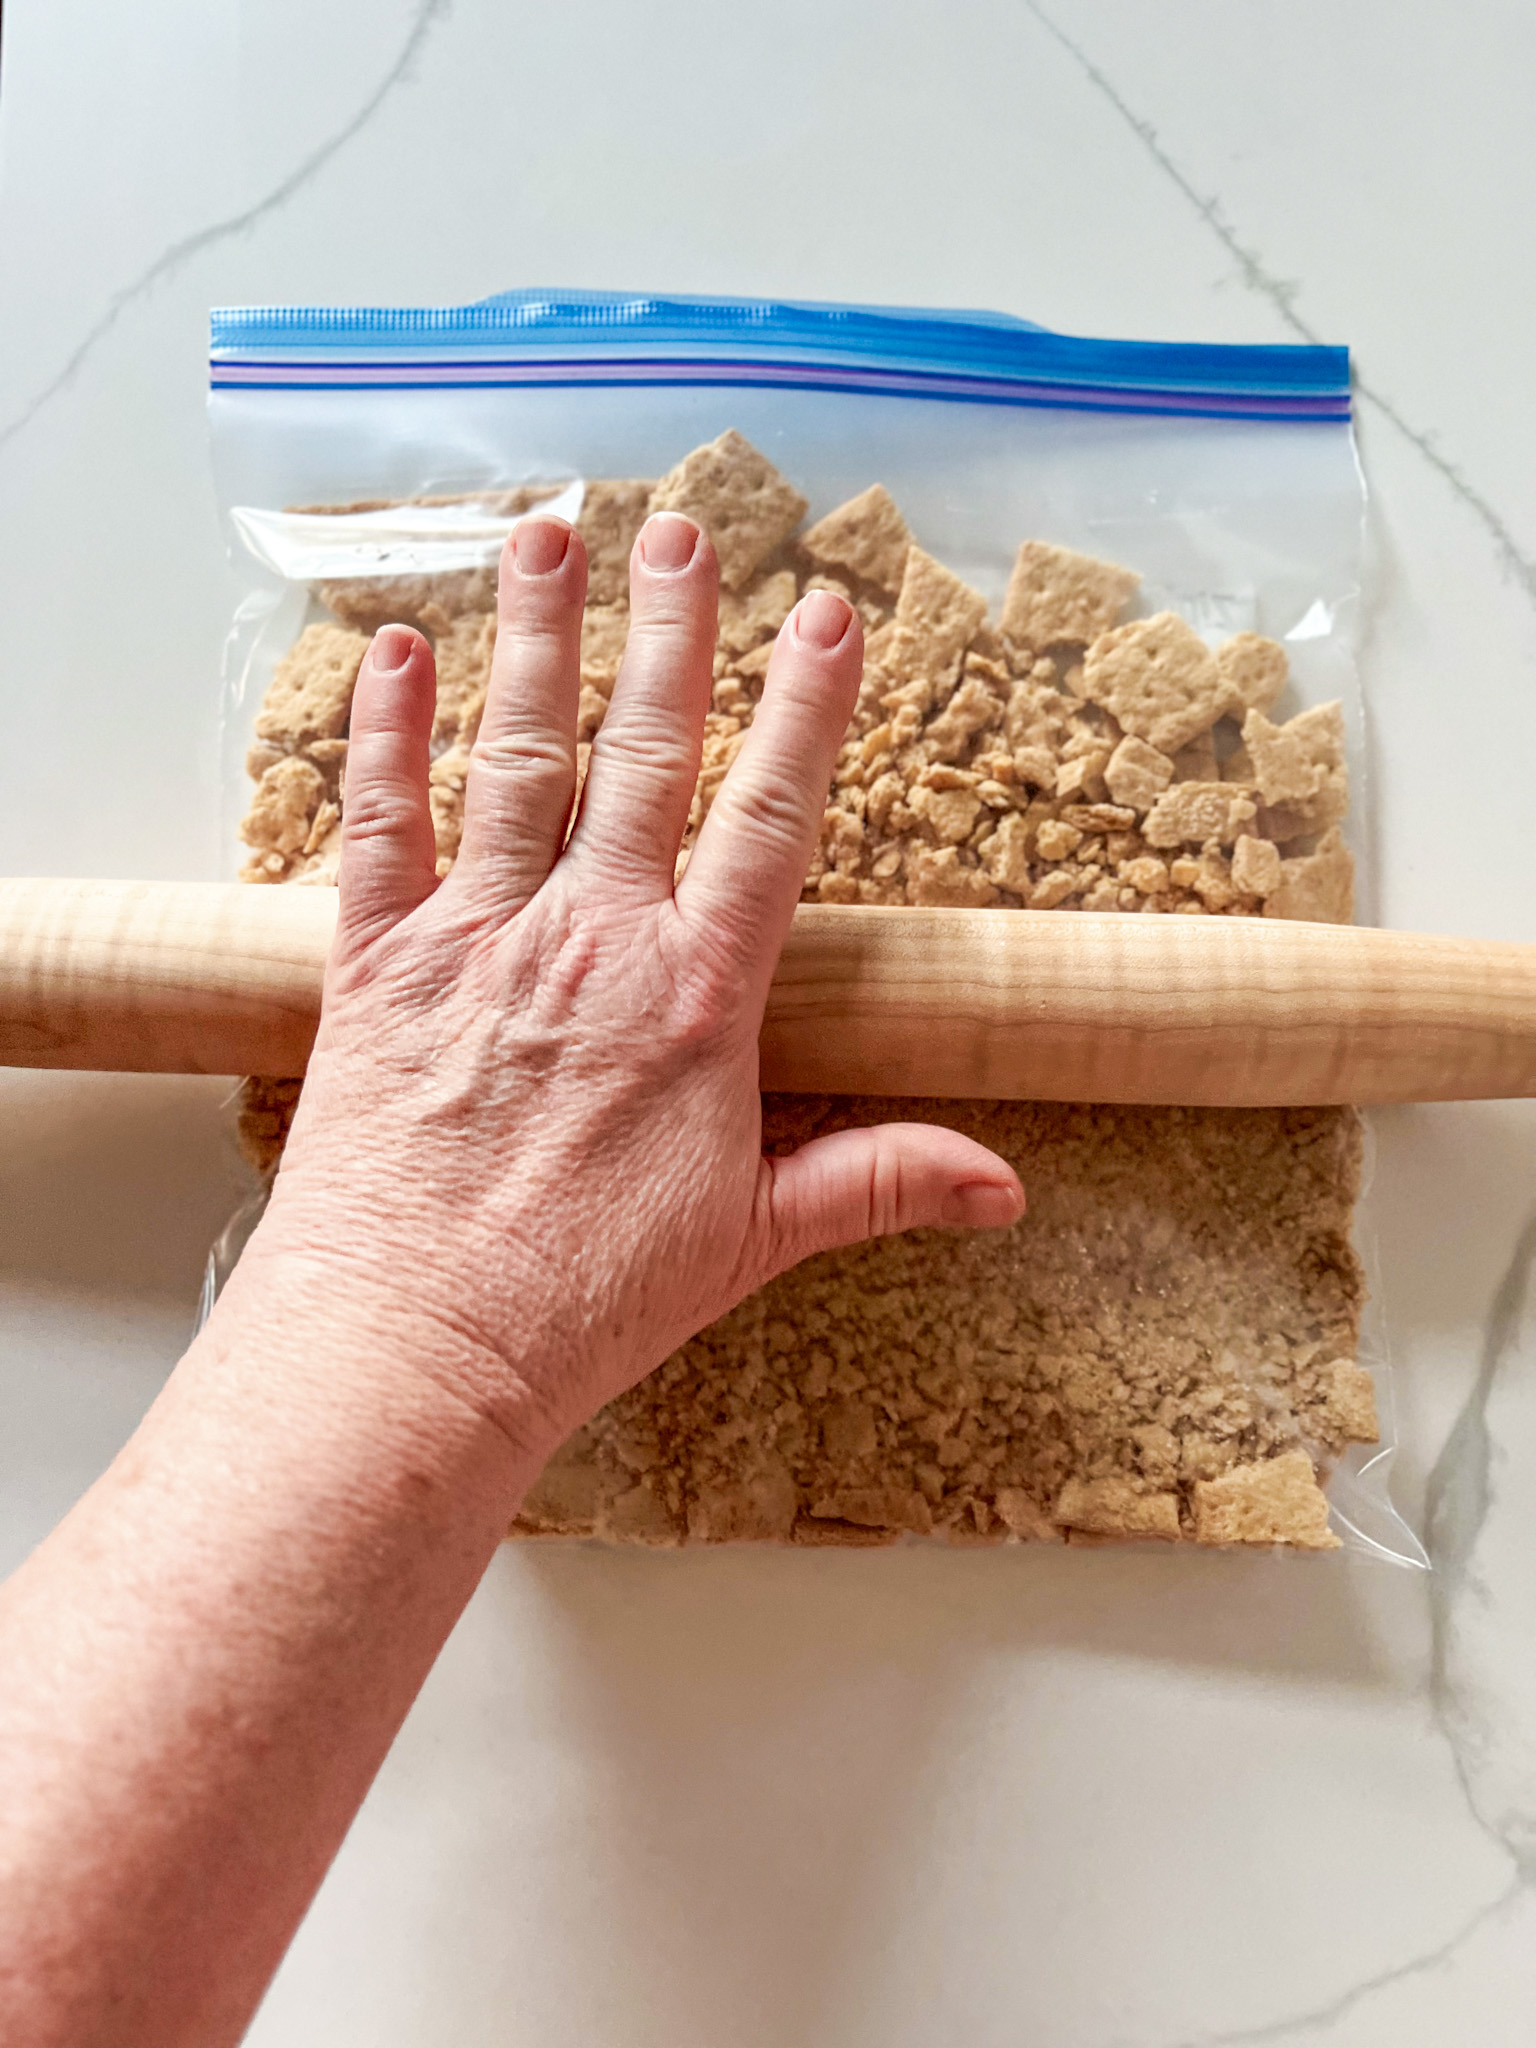 Hand using a rolling pin to crush graham crackers in a plastic bag